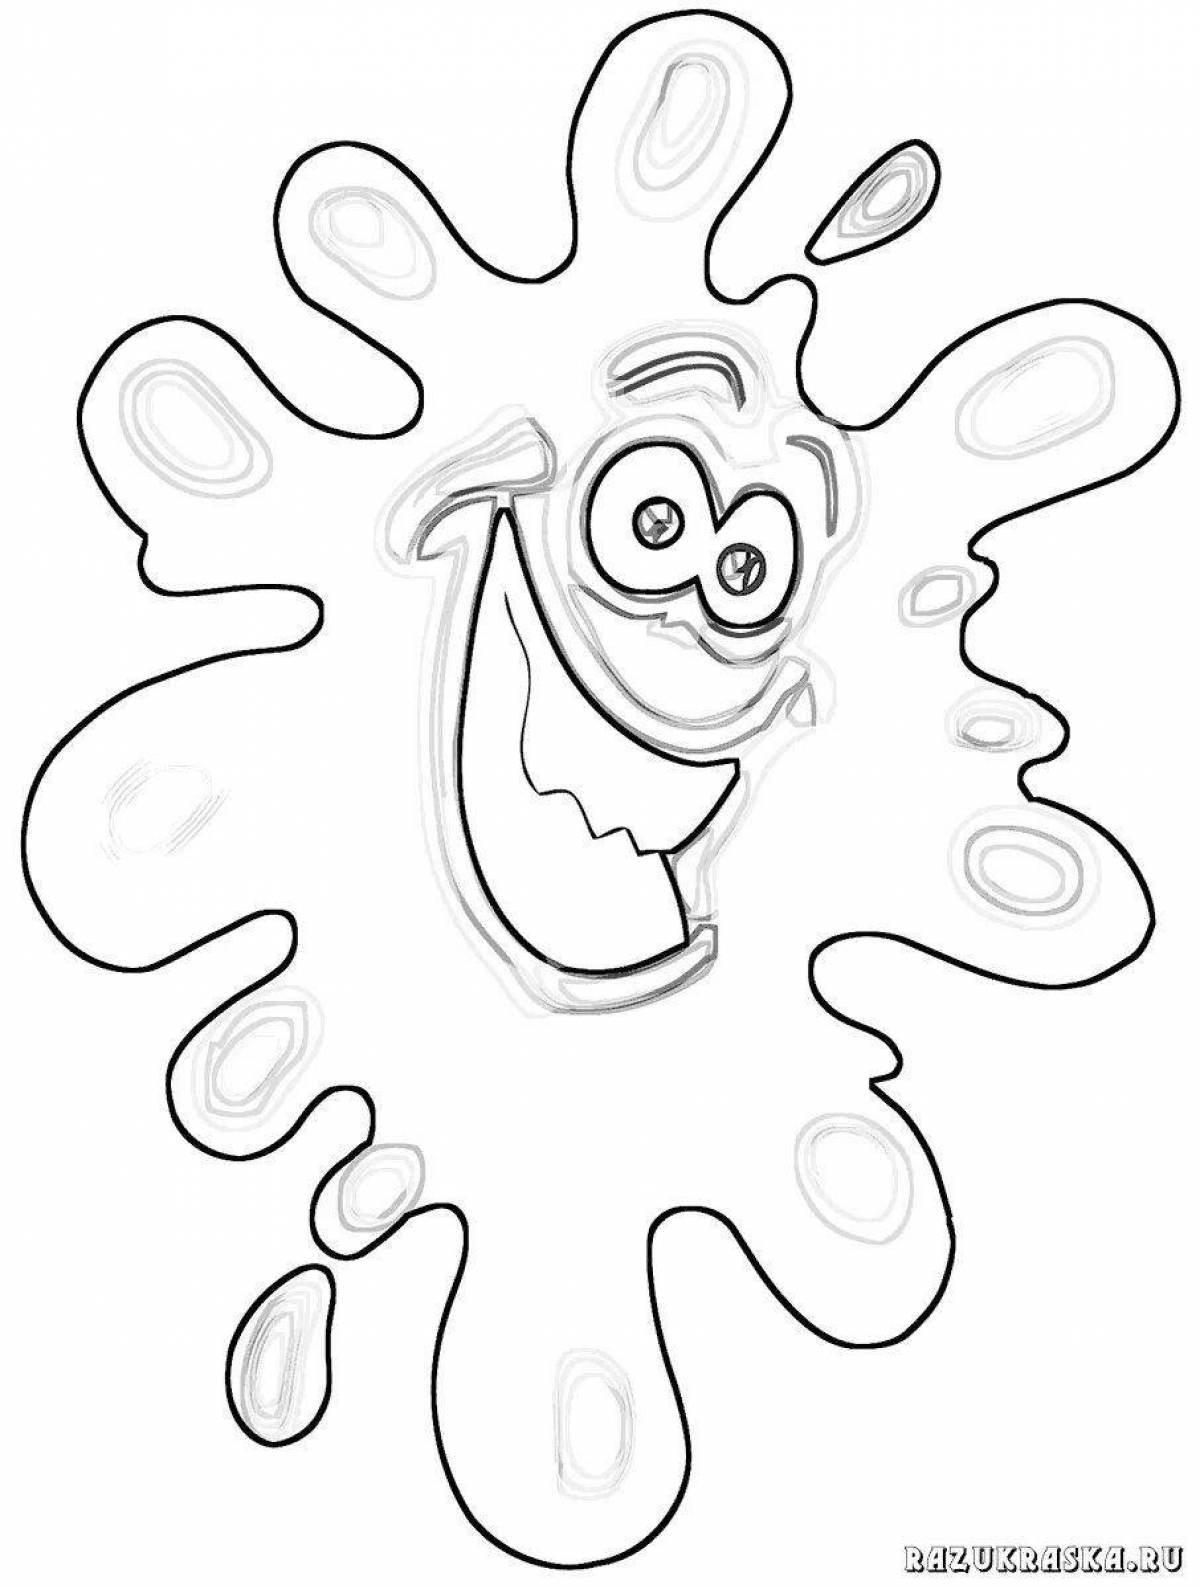 Delight blot coloring page